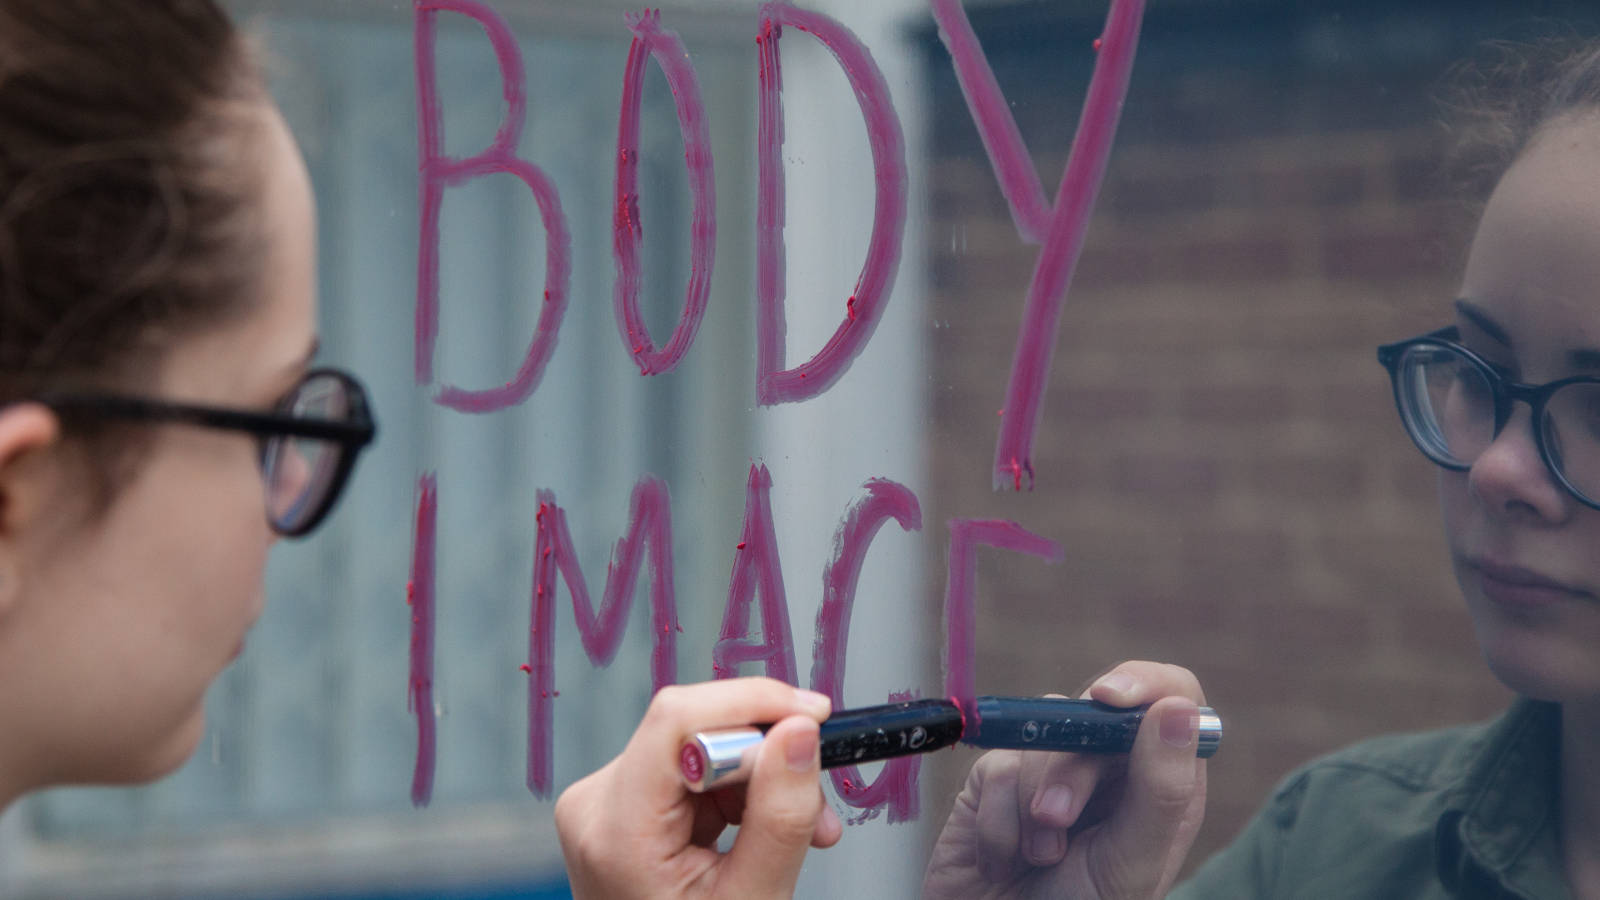 Body Image written on a mirror with lipstick